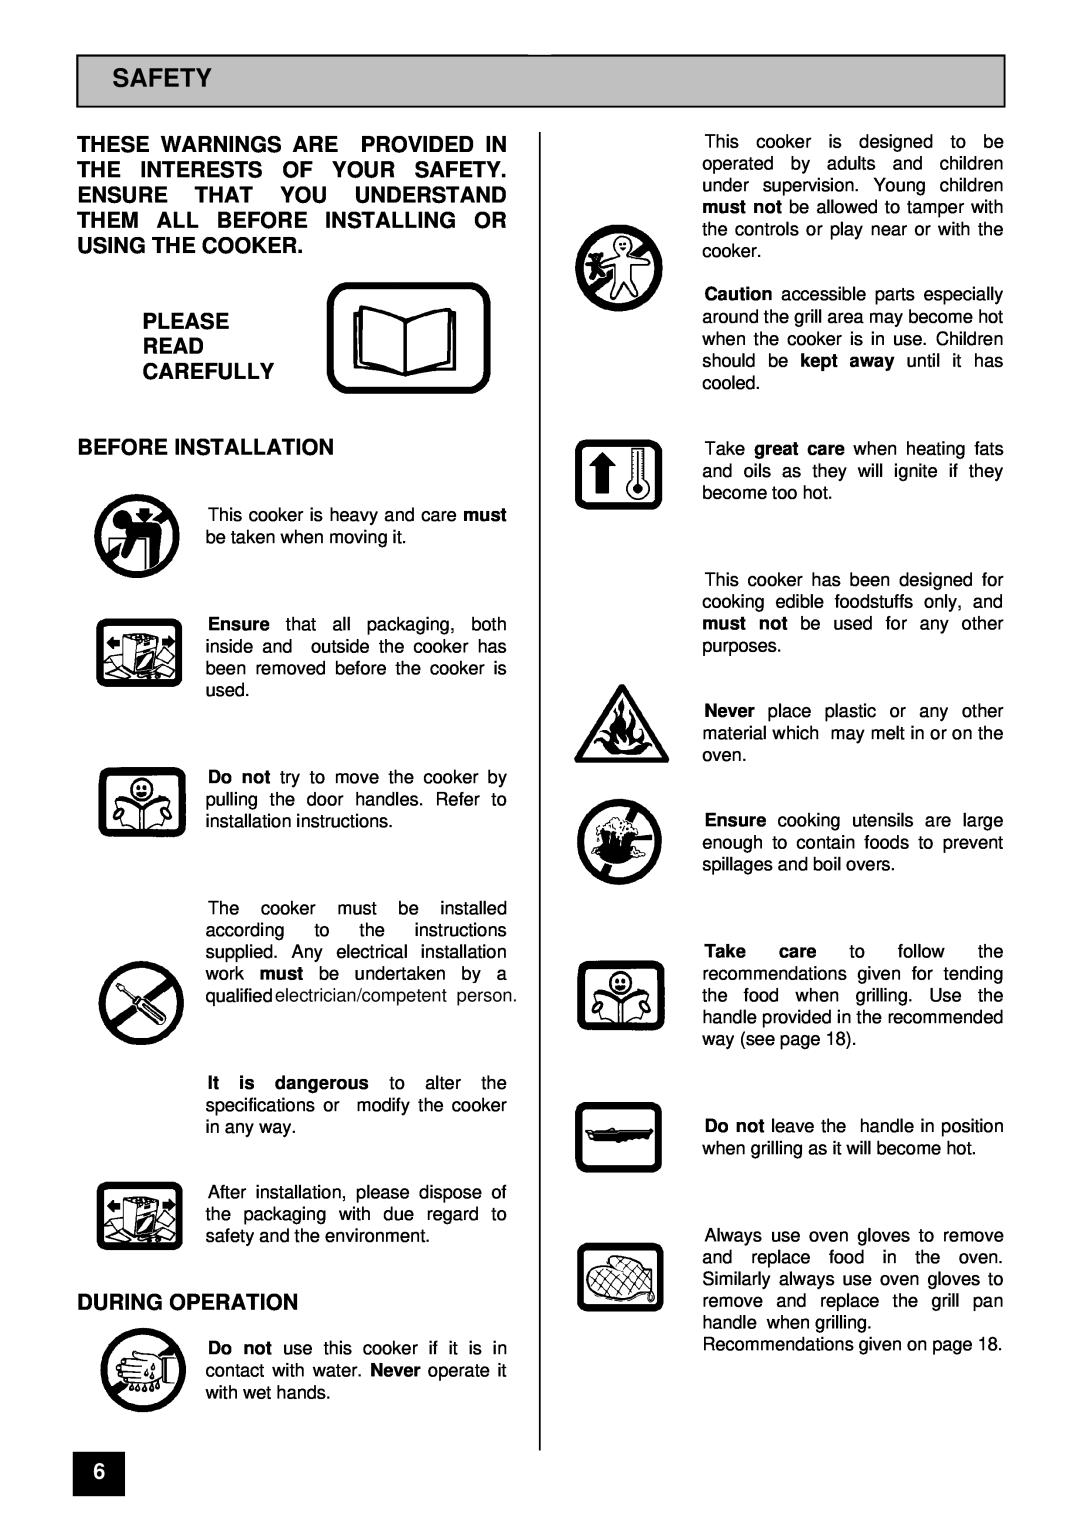 Tricity Bendix BD 921 installation instructions Safety, Please Read Carefully Before Installation, During Operation 